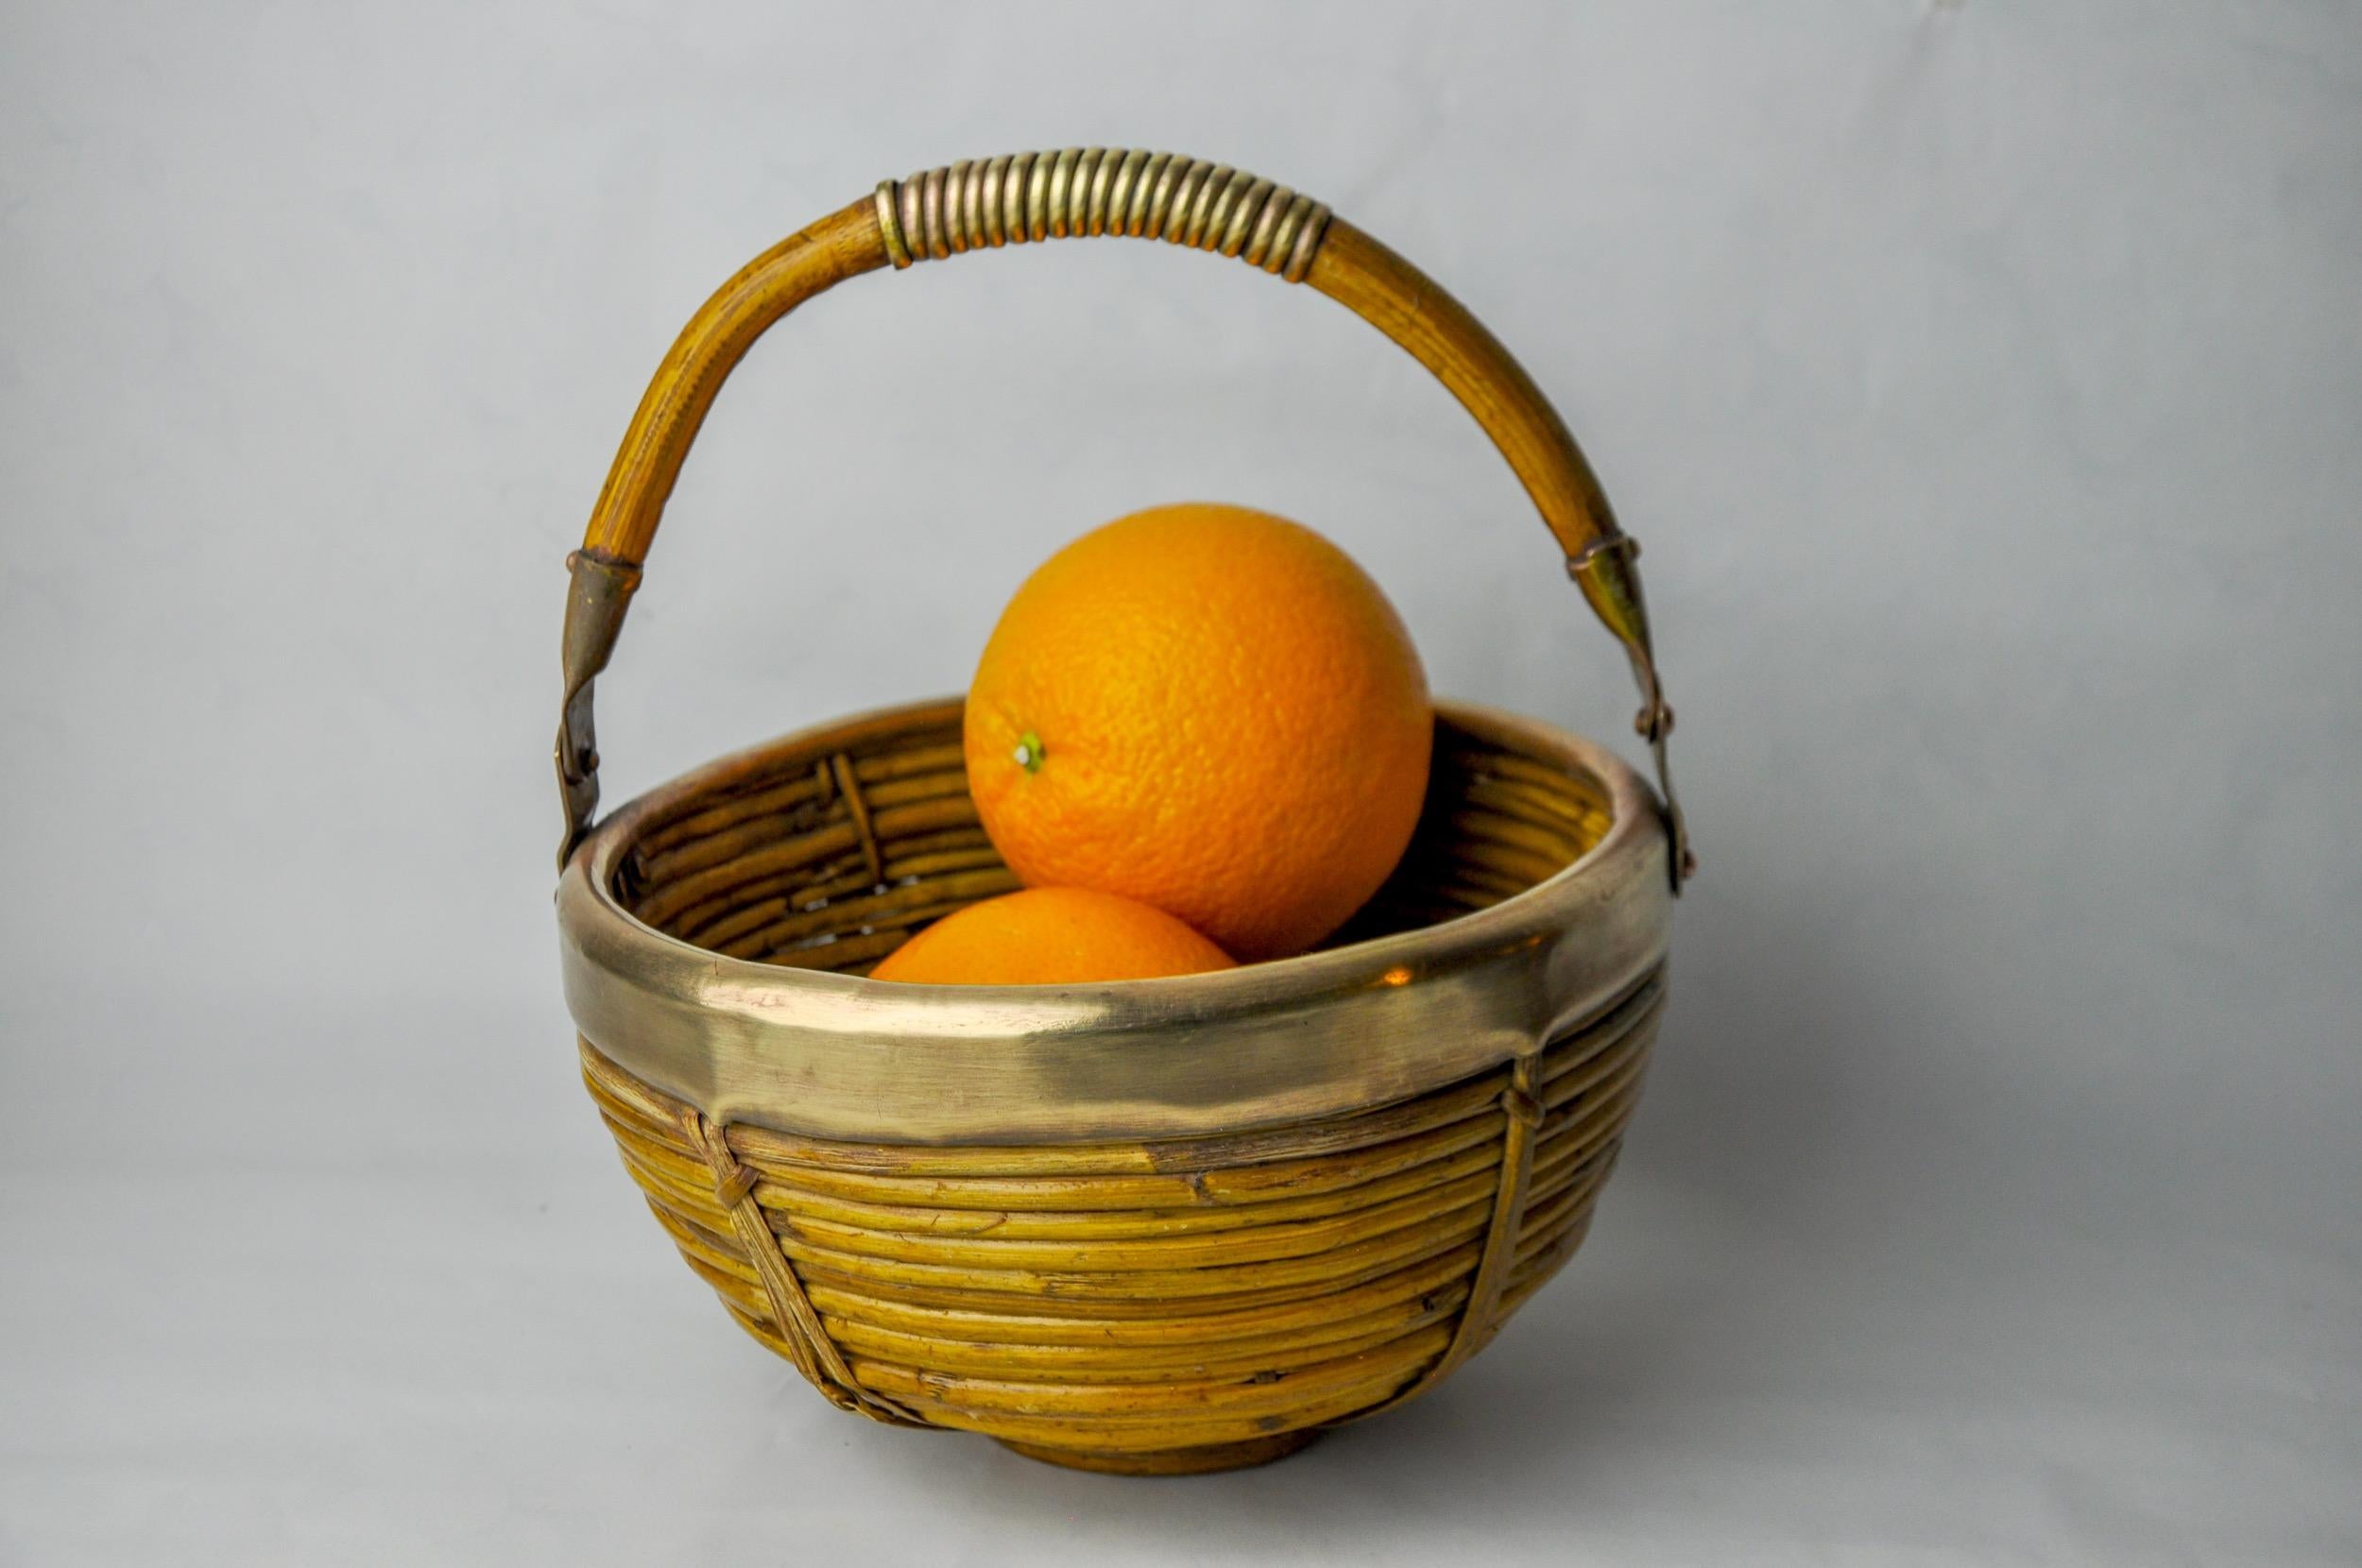 Very nice basket with rattan handle and brass made in italy in the 1970s. Round shape, mid-century modern style. It is inspired by the drawings of gabriella crespi. Beautiful decorative object that will bring a real design touch to your interior.